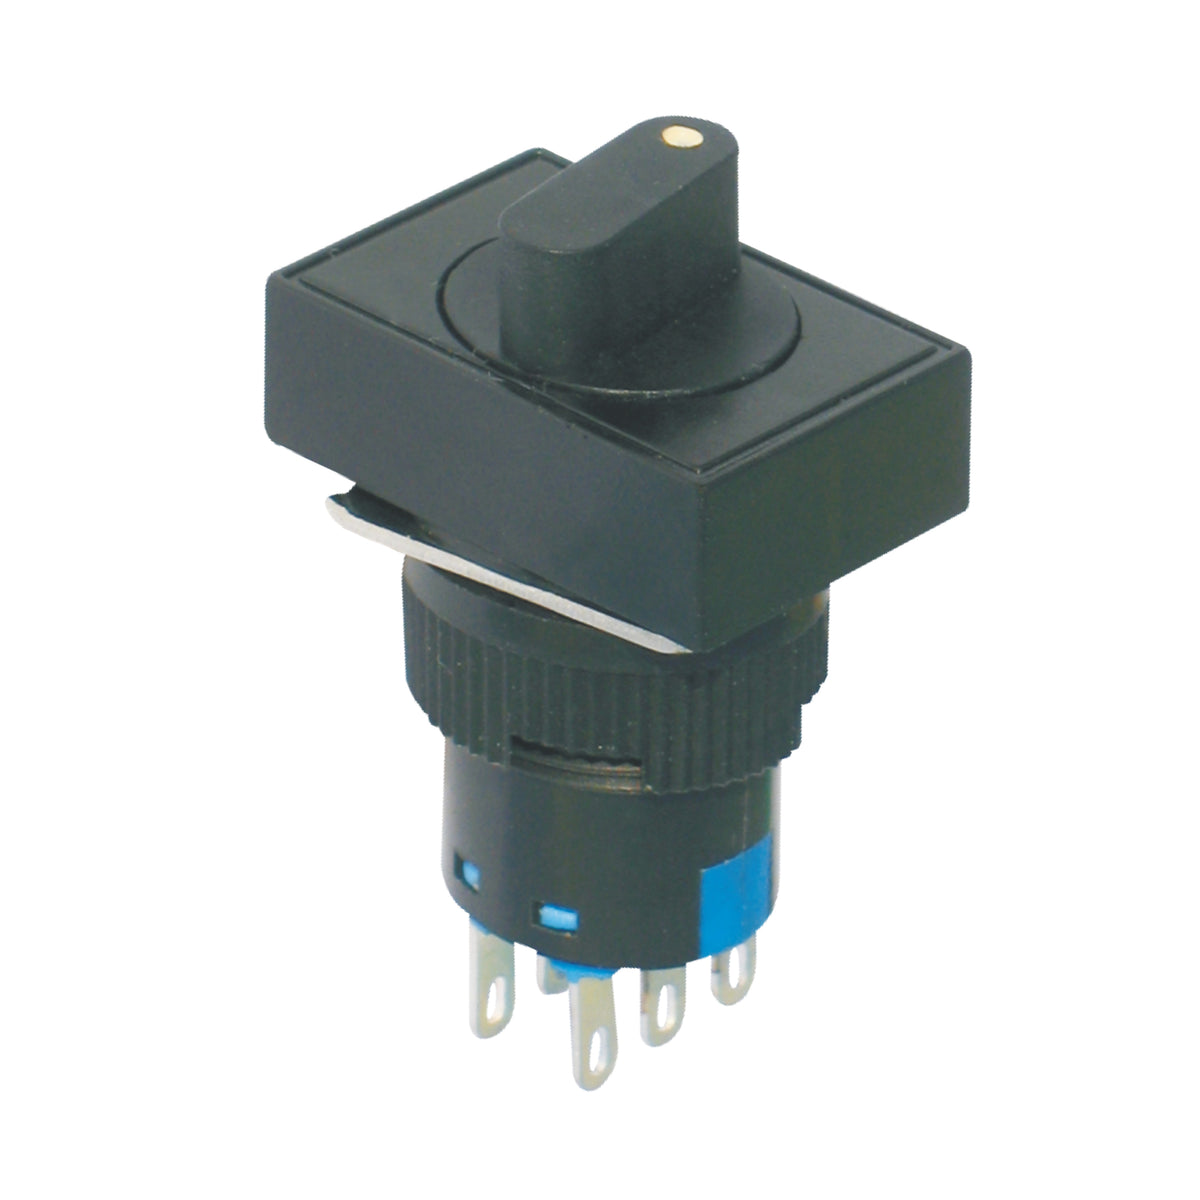 16mm Rectangular Rotary Selector Switch 2-gear Latching 1 Normally-Open and 1 Normally-Closed